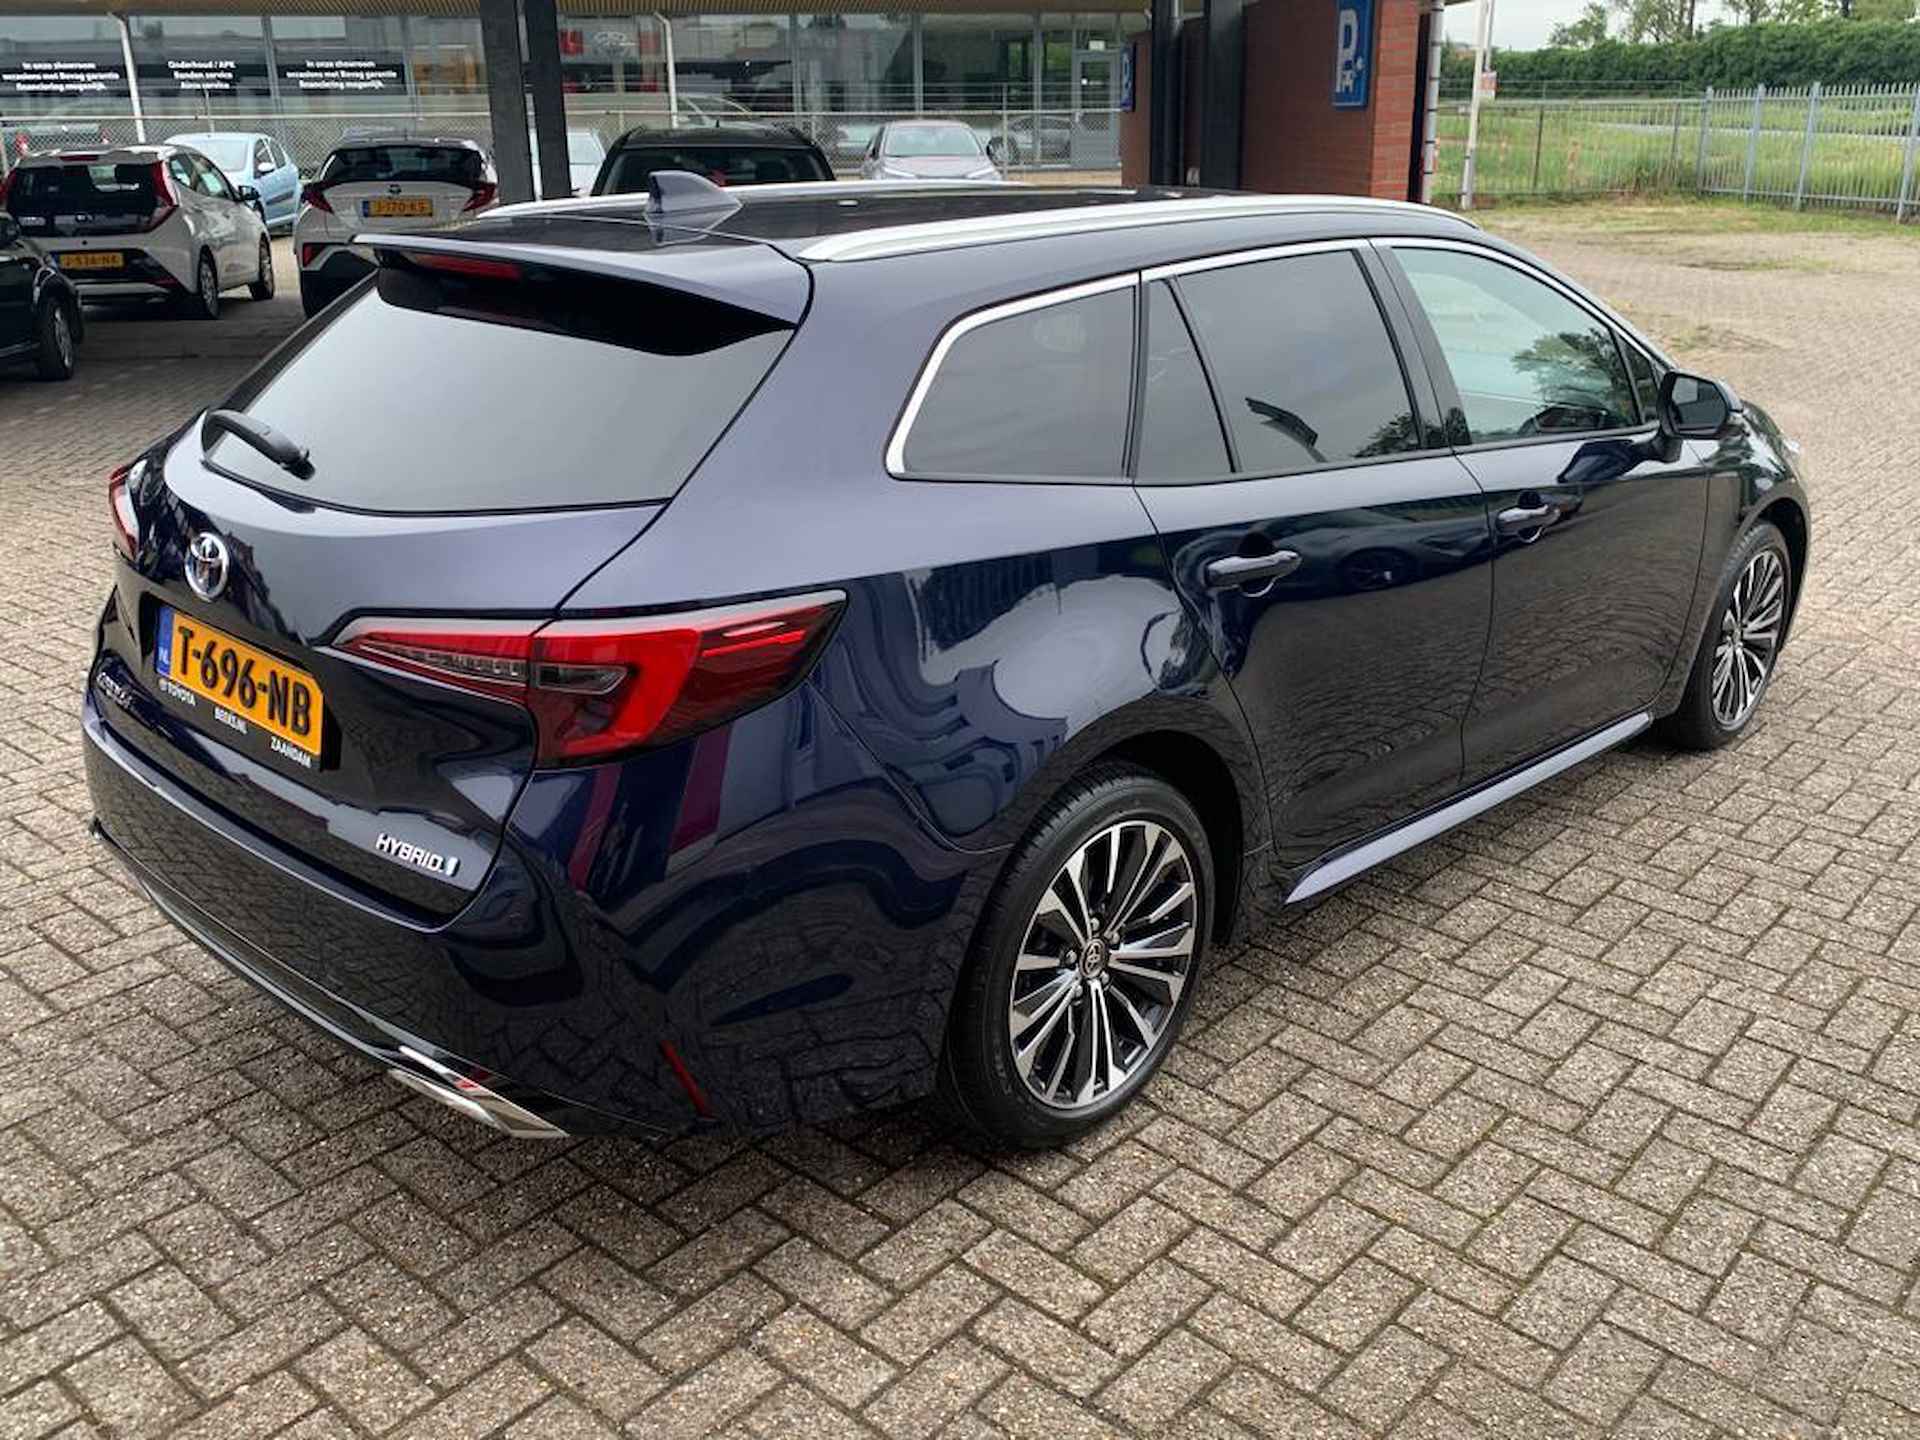 Toyota Corolla Touring Sports 1.8 Hybrid First Edition - 5/24